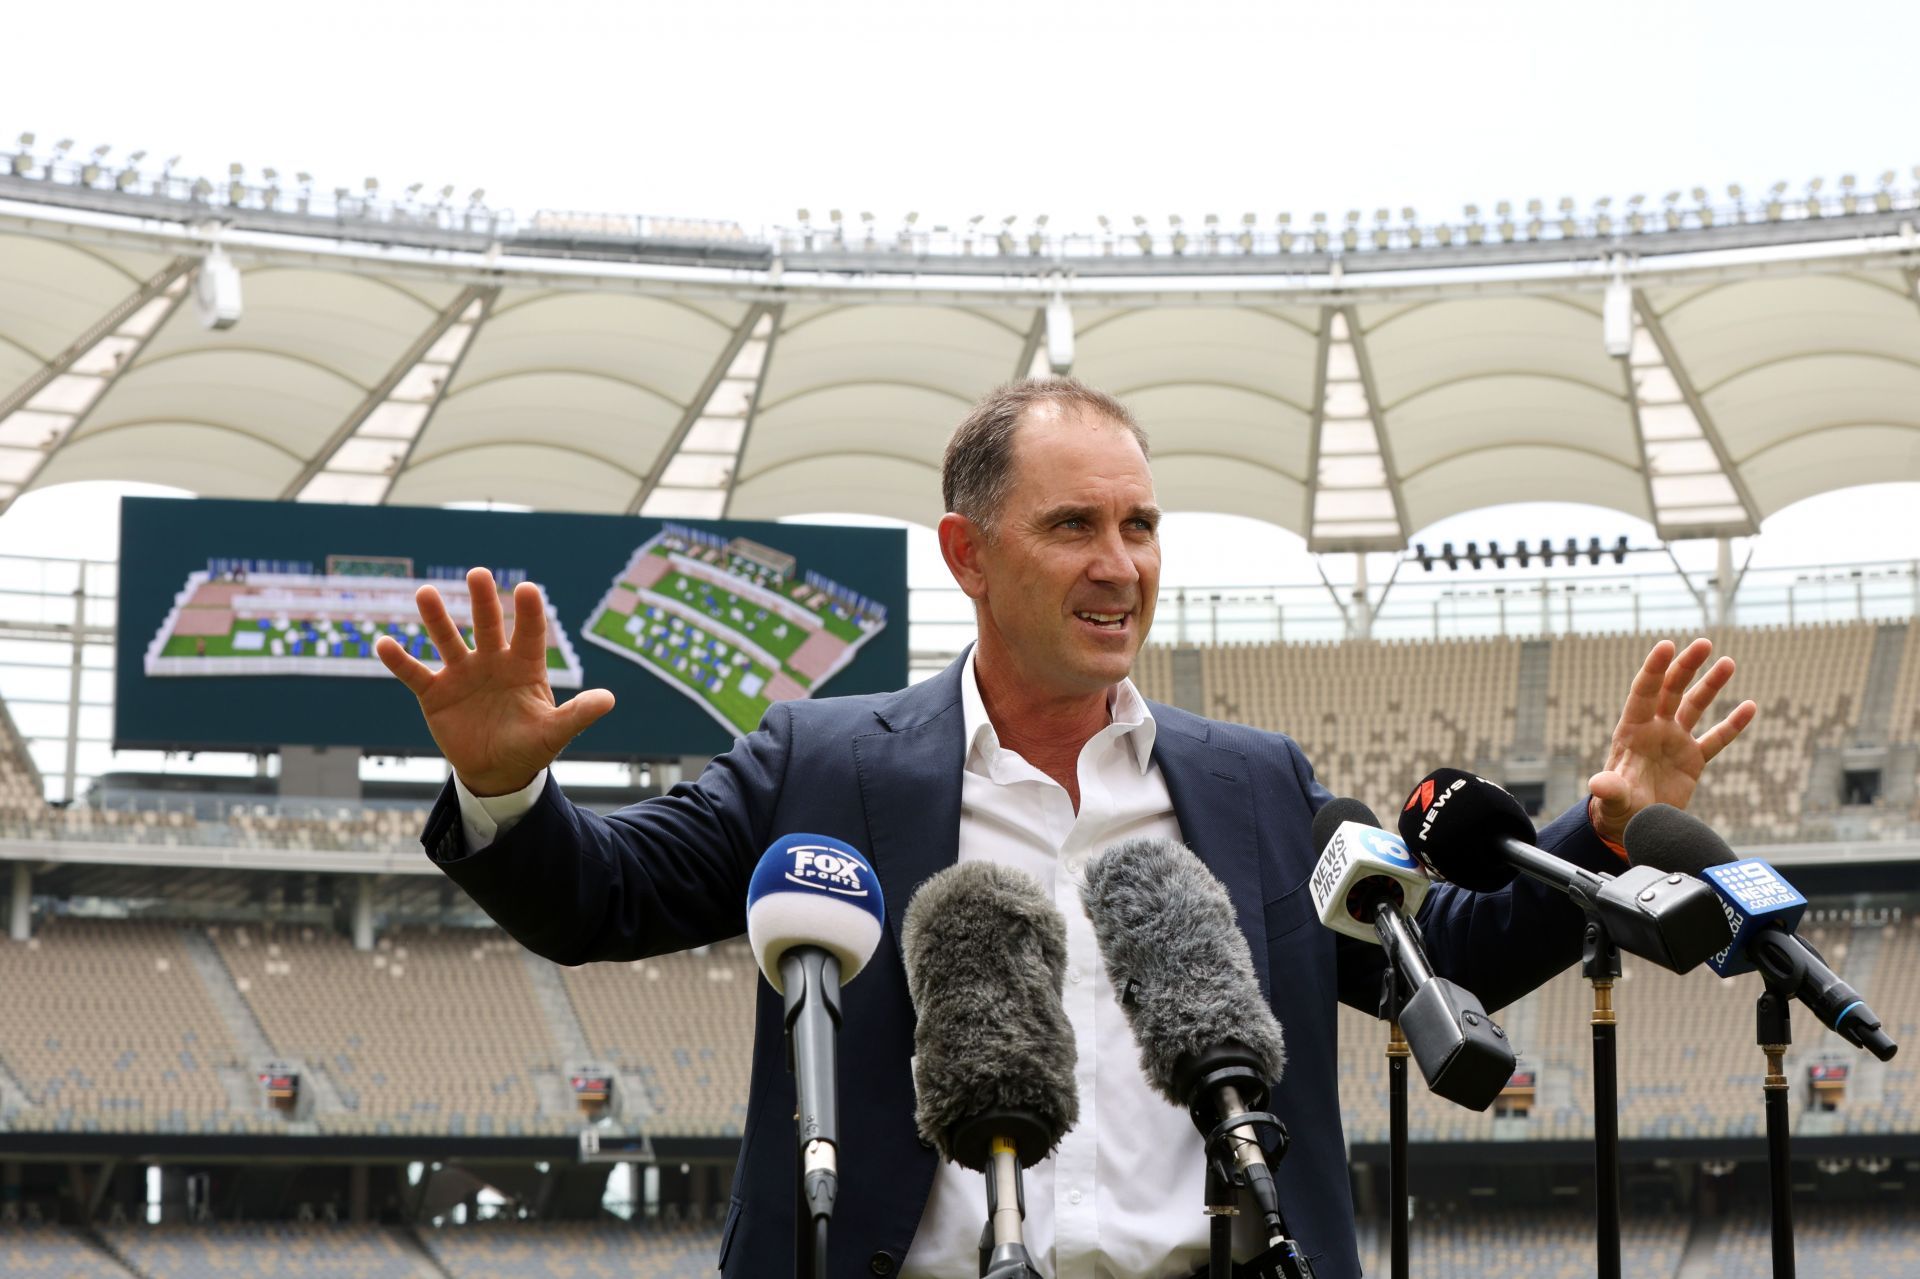 Justin Langer has coached the Australian team with success in the recent past